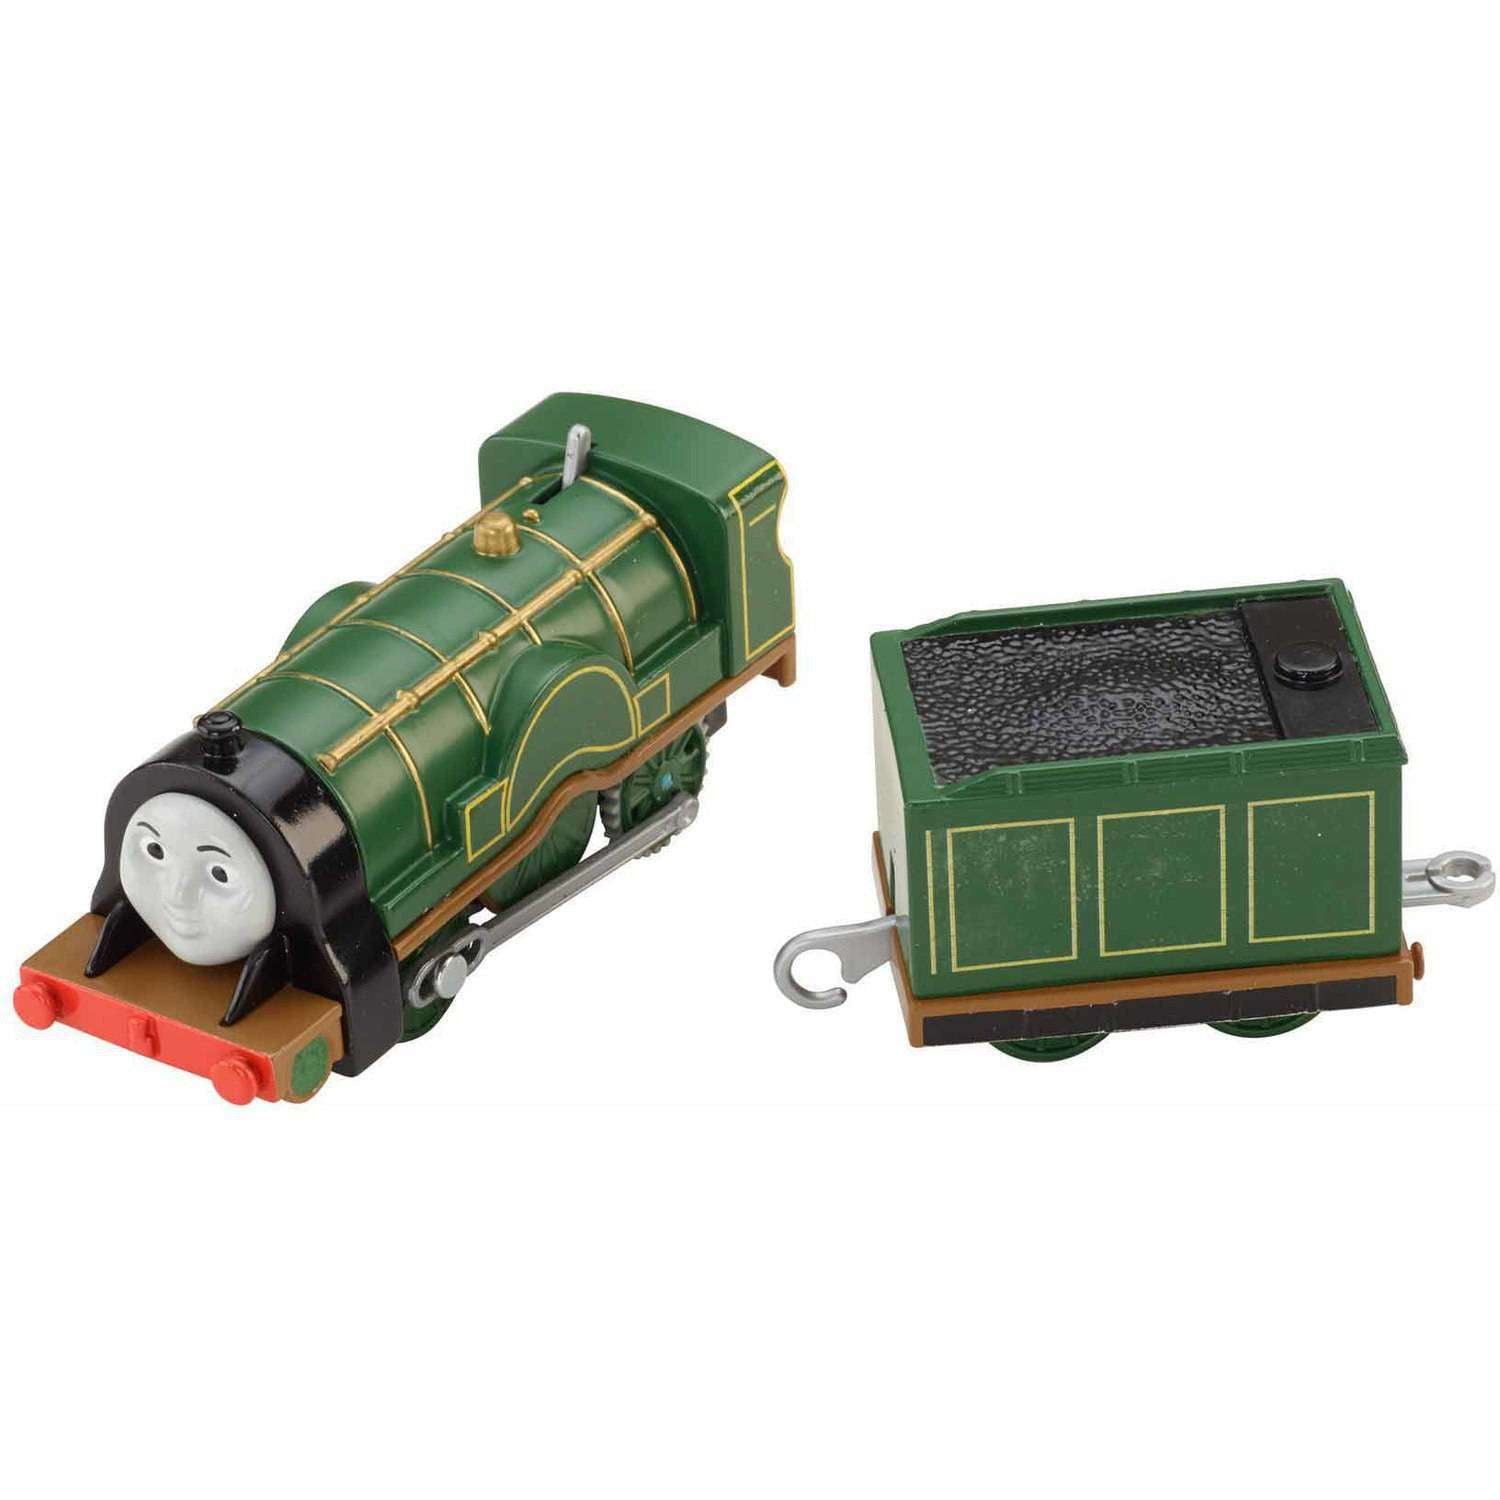 Details about   Thomas & Friends Trackmaster Emily Motorized Battery Train Engine Only 2013